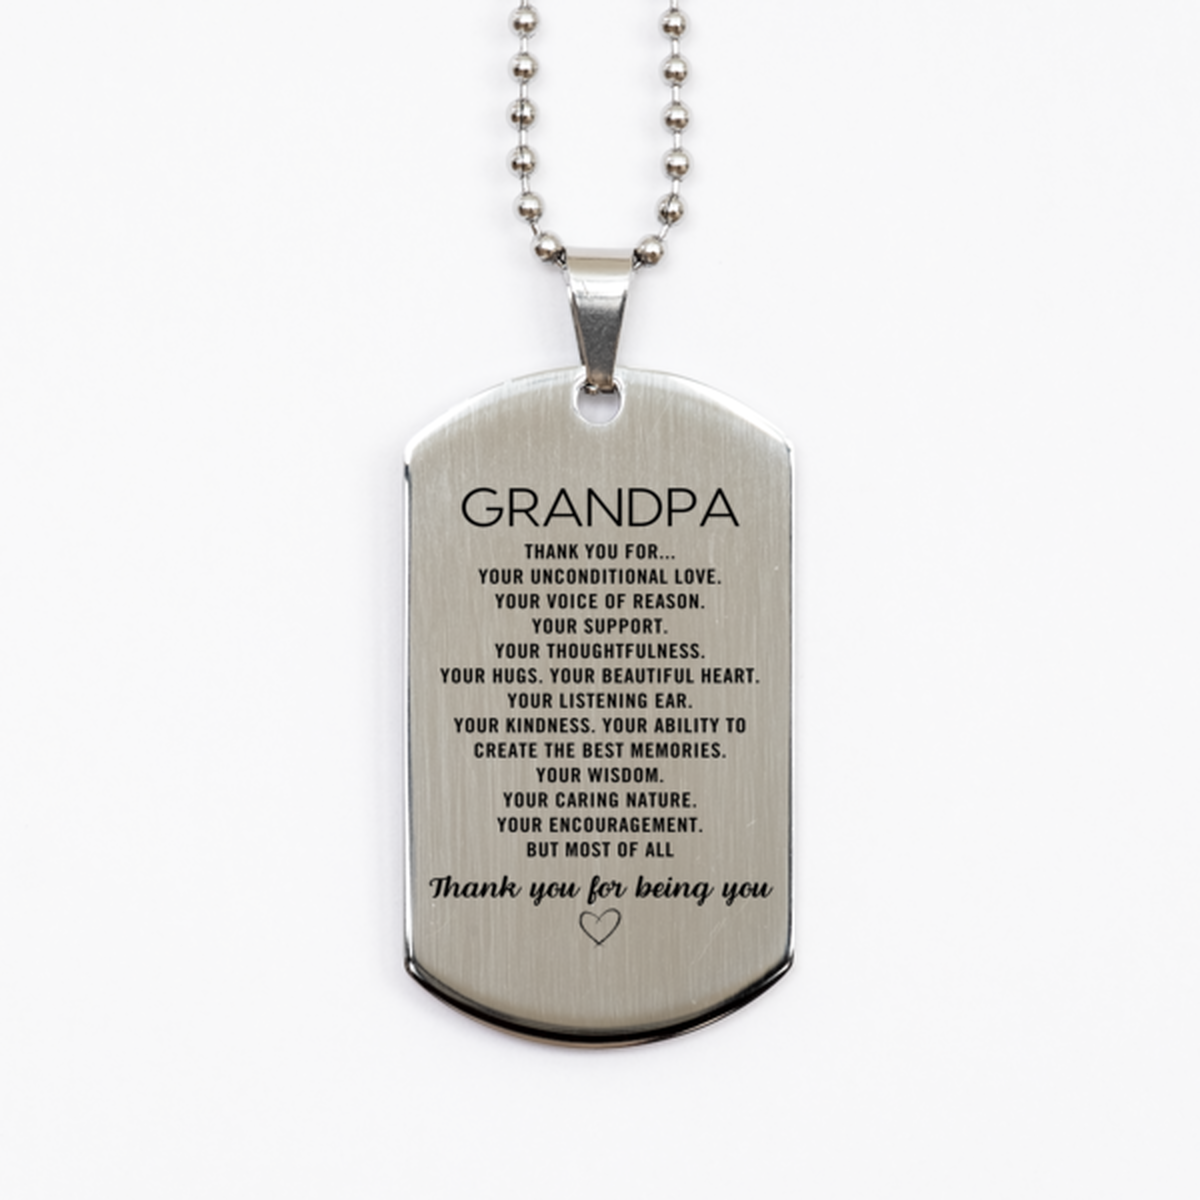 Grandpa Silver Dog Tag Custom, Engraved Gifts For Grandpa Christmas Graduation Birthday Gifts for Men Women Grandpa Thank you for Your unconditional love